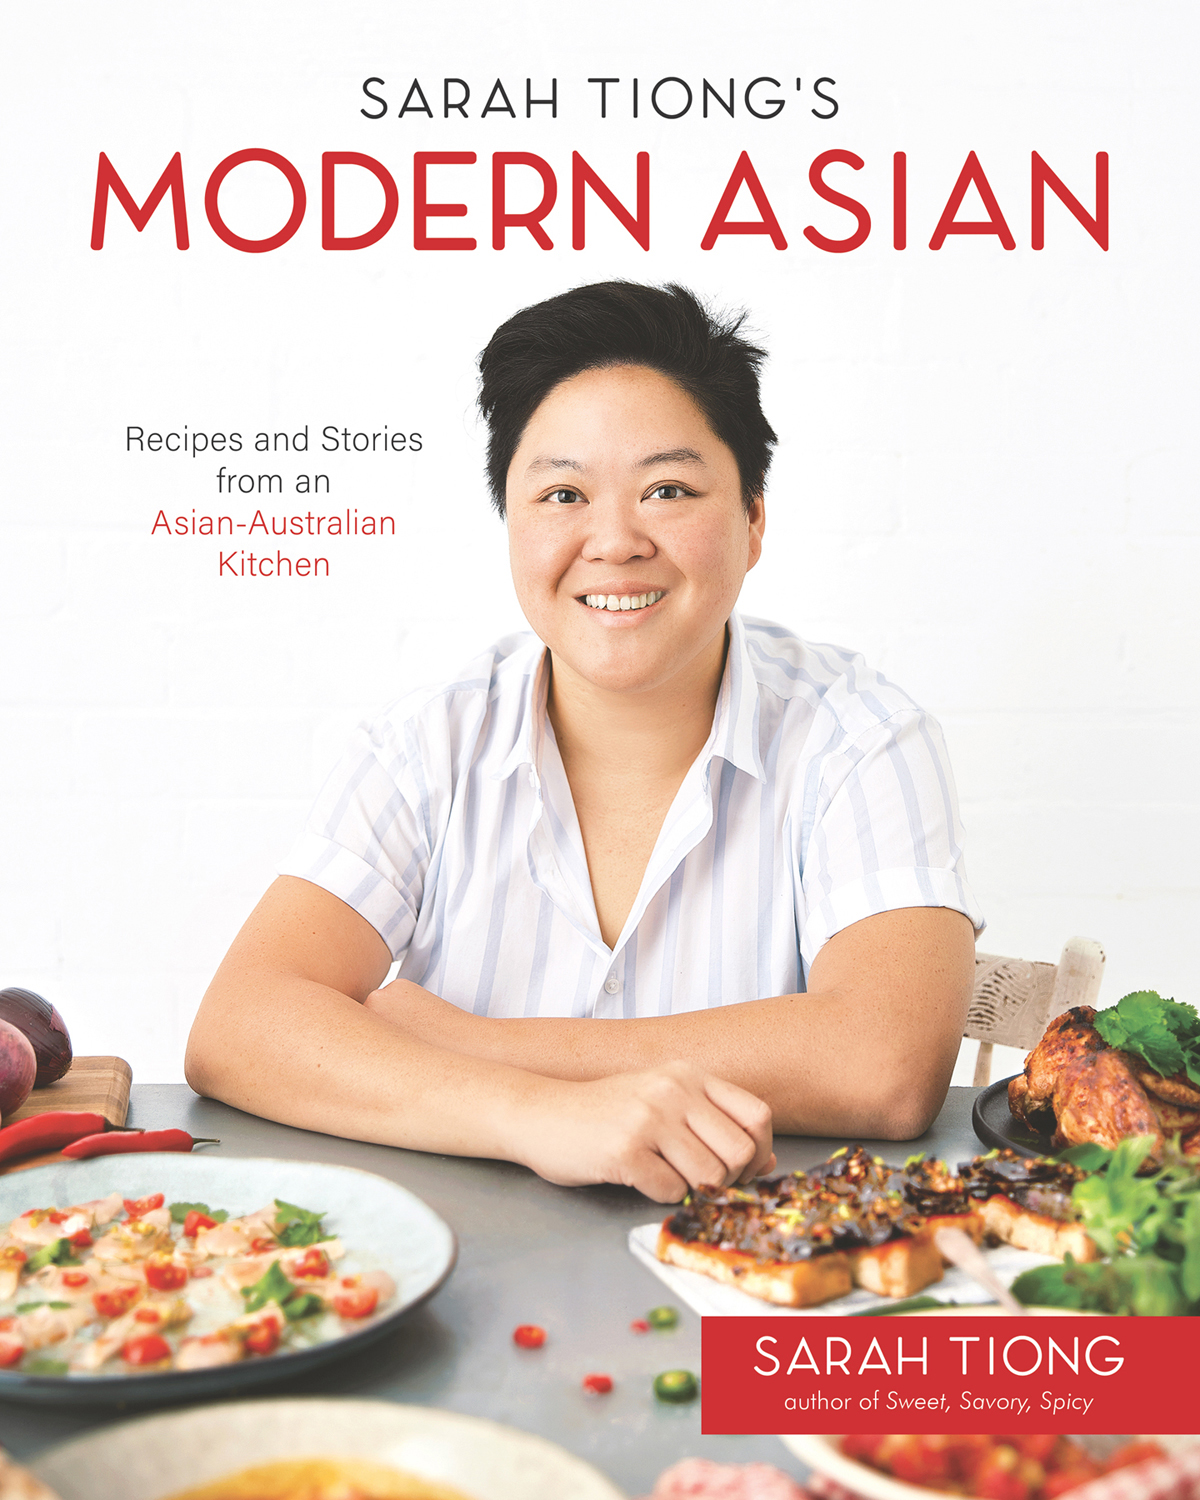 Recipes and Stories from an Asian-Australian Kitchen SARAH TIONGS MODERN ASIAN - photo 1